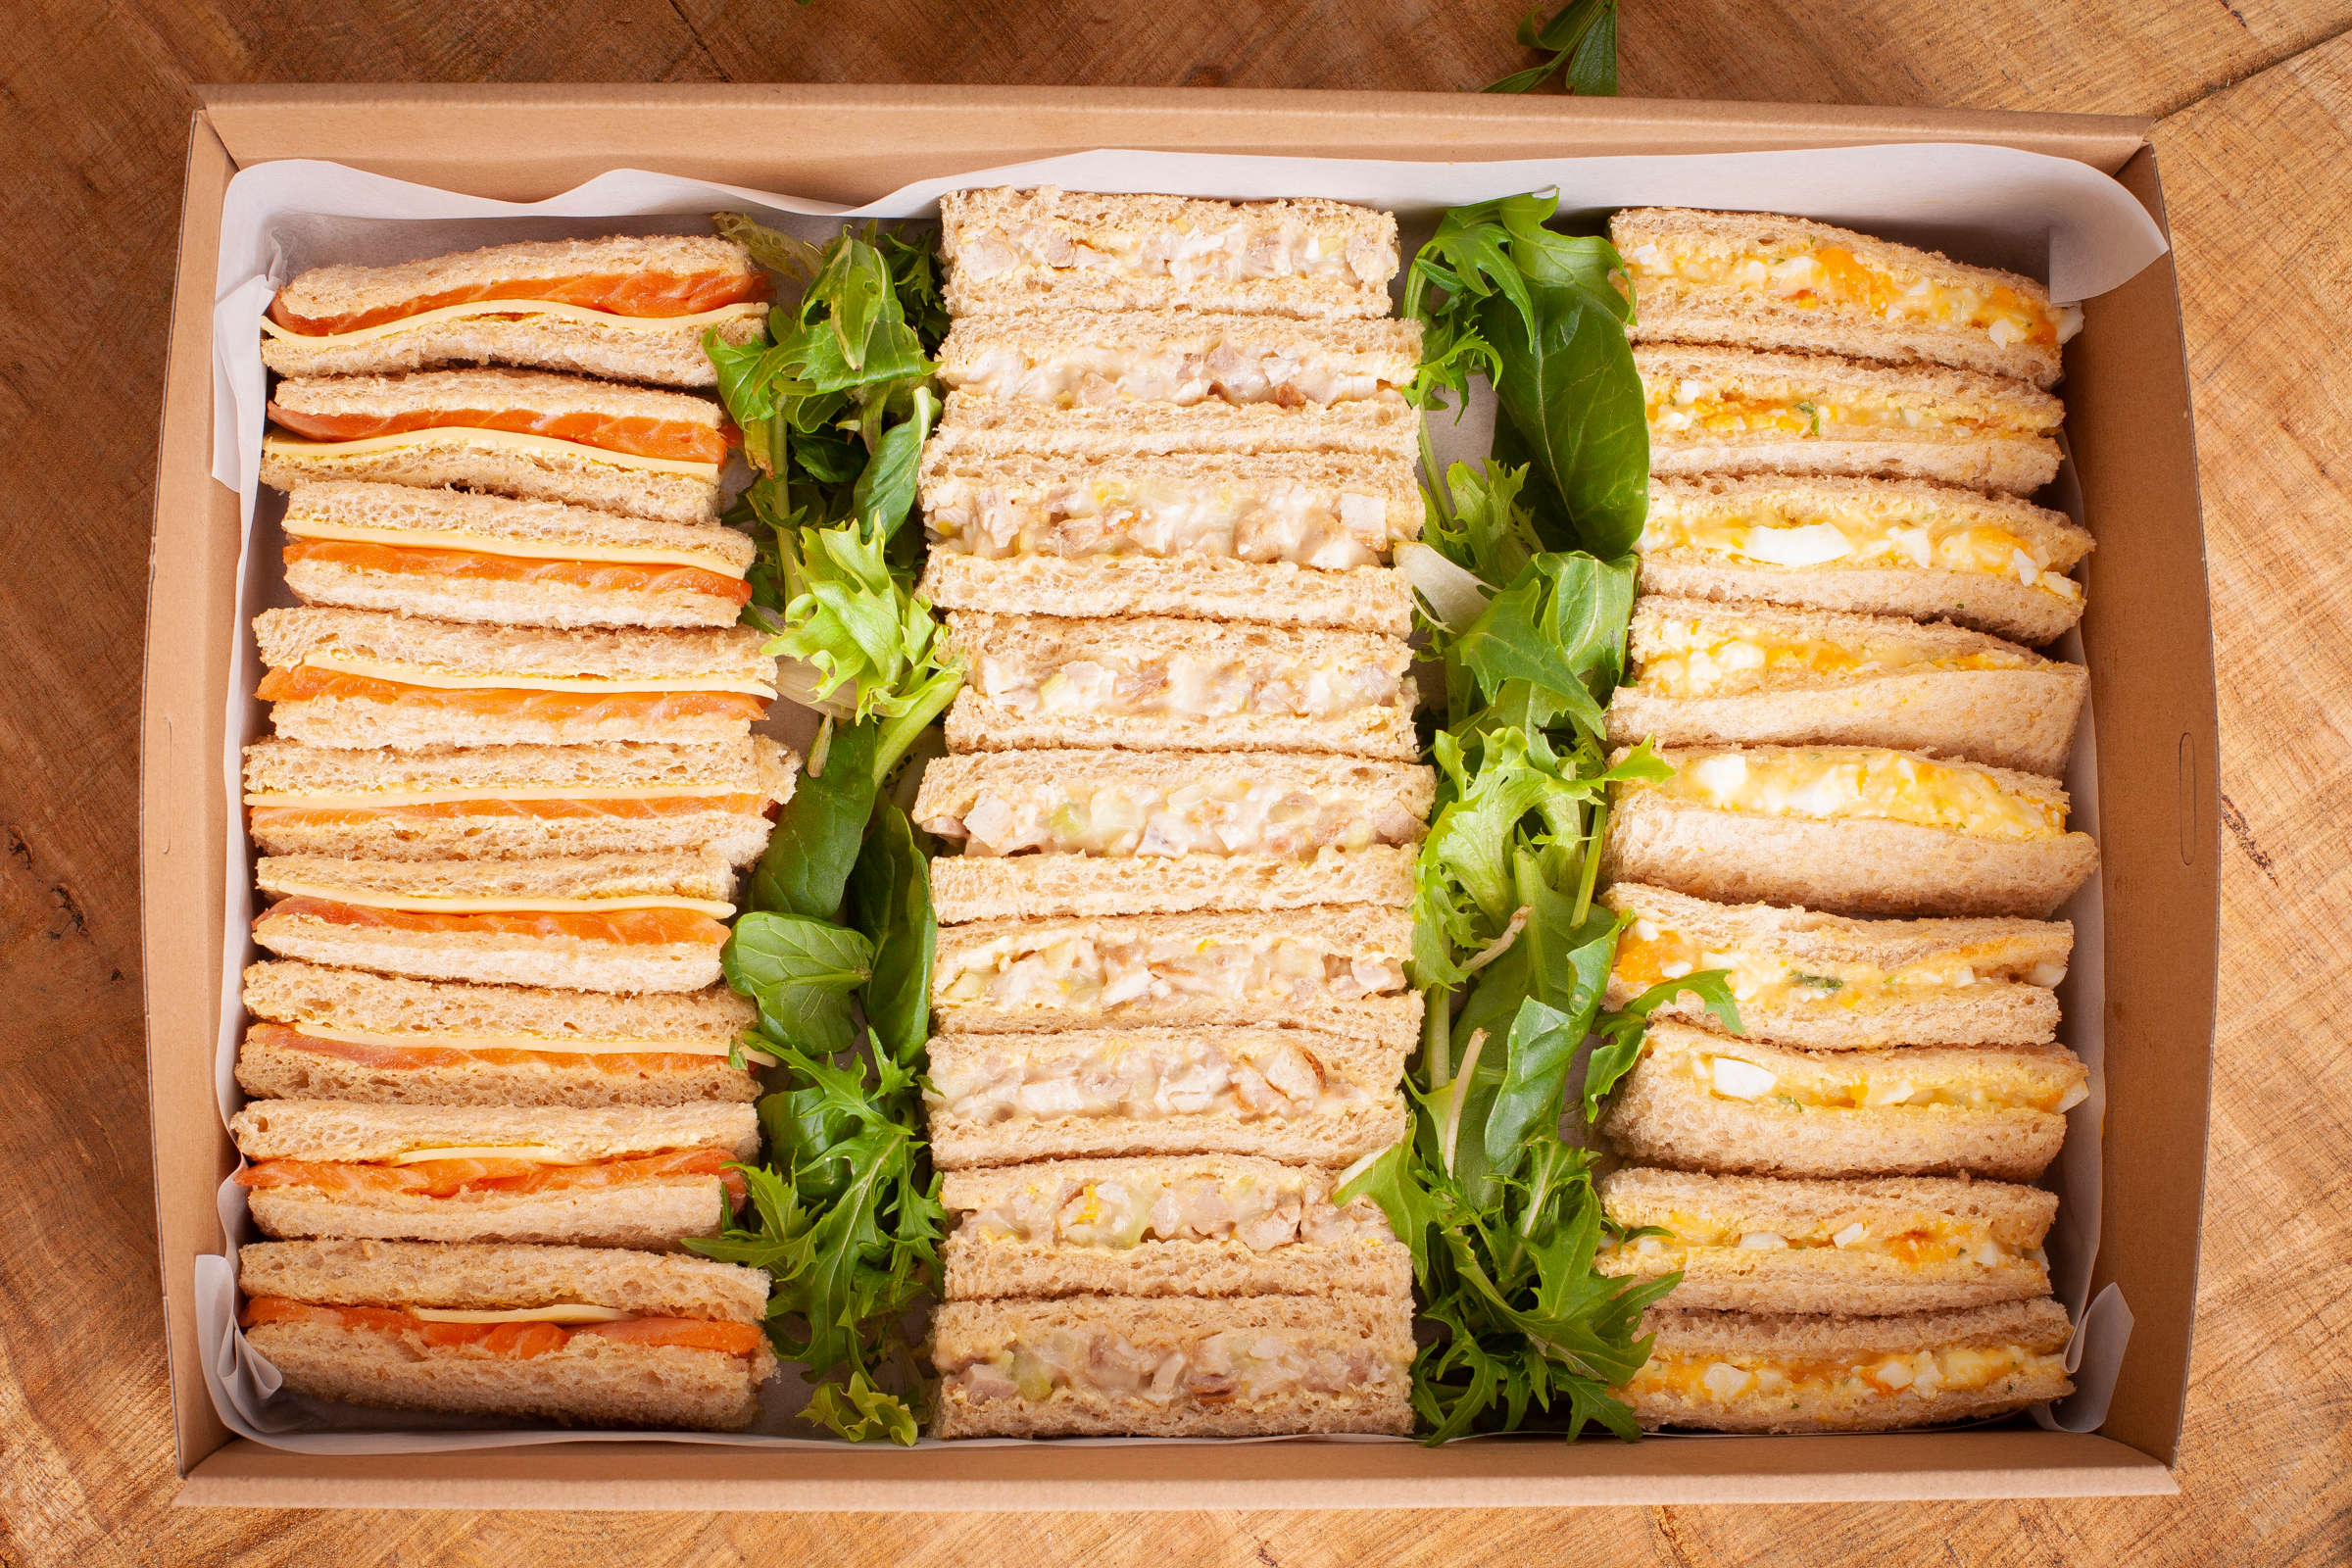 Ribbon sandwich catering box containing 30 ribbons, fillings include egg, free range chicken, smoked salmon. Credit: Richard Jupe.